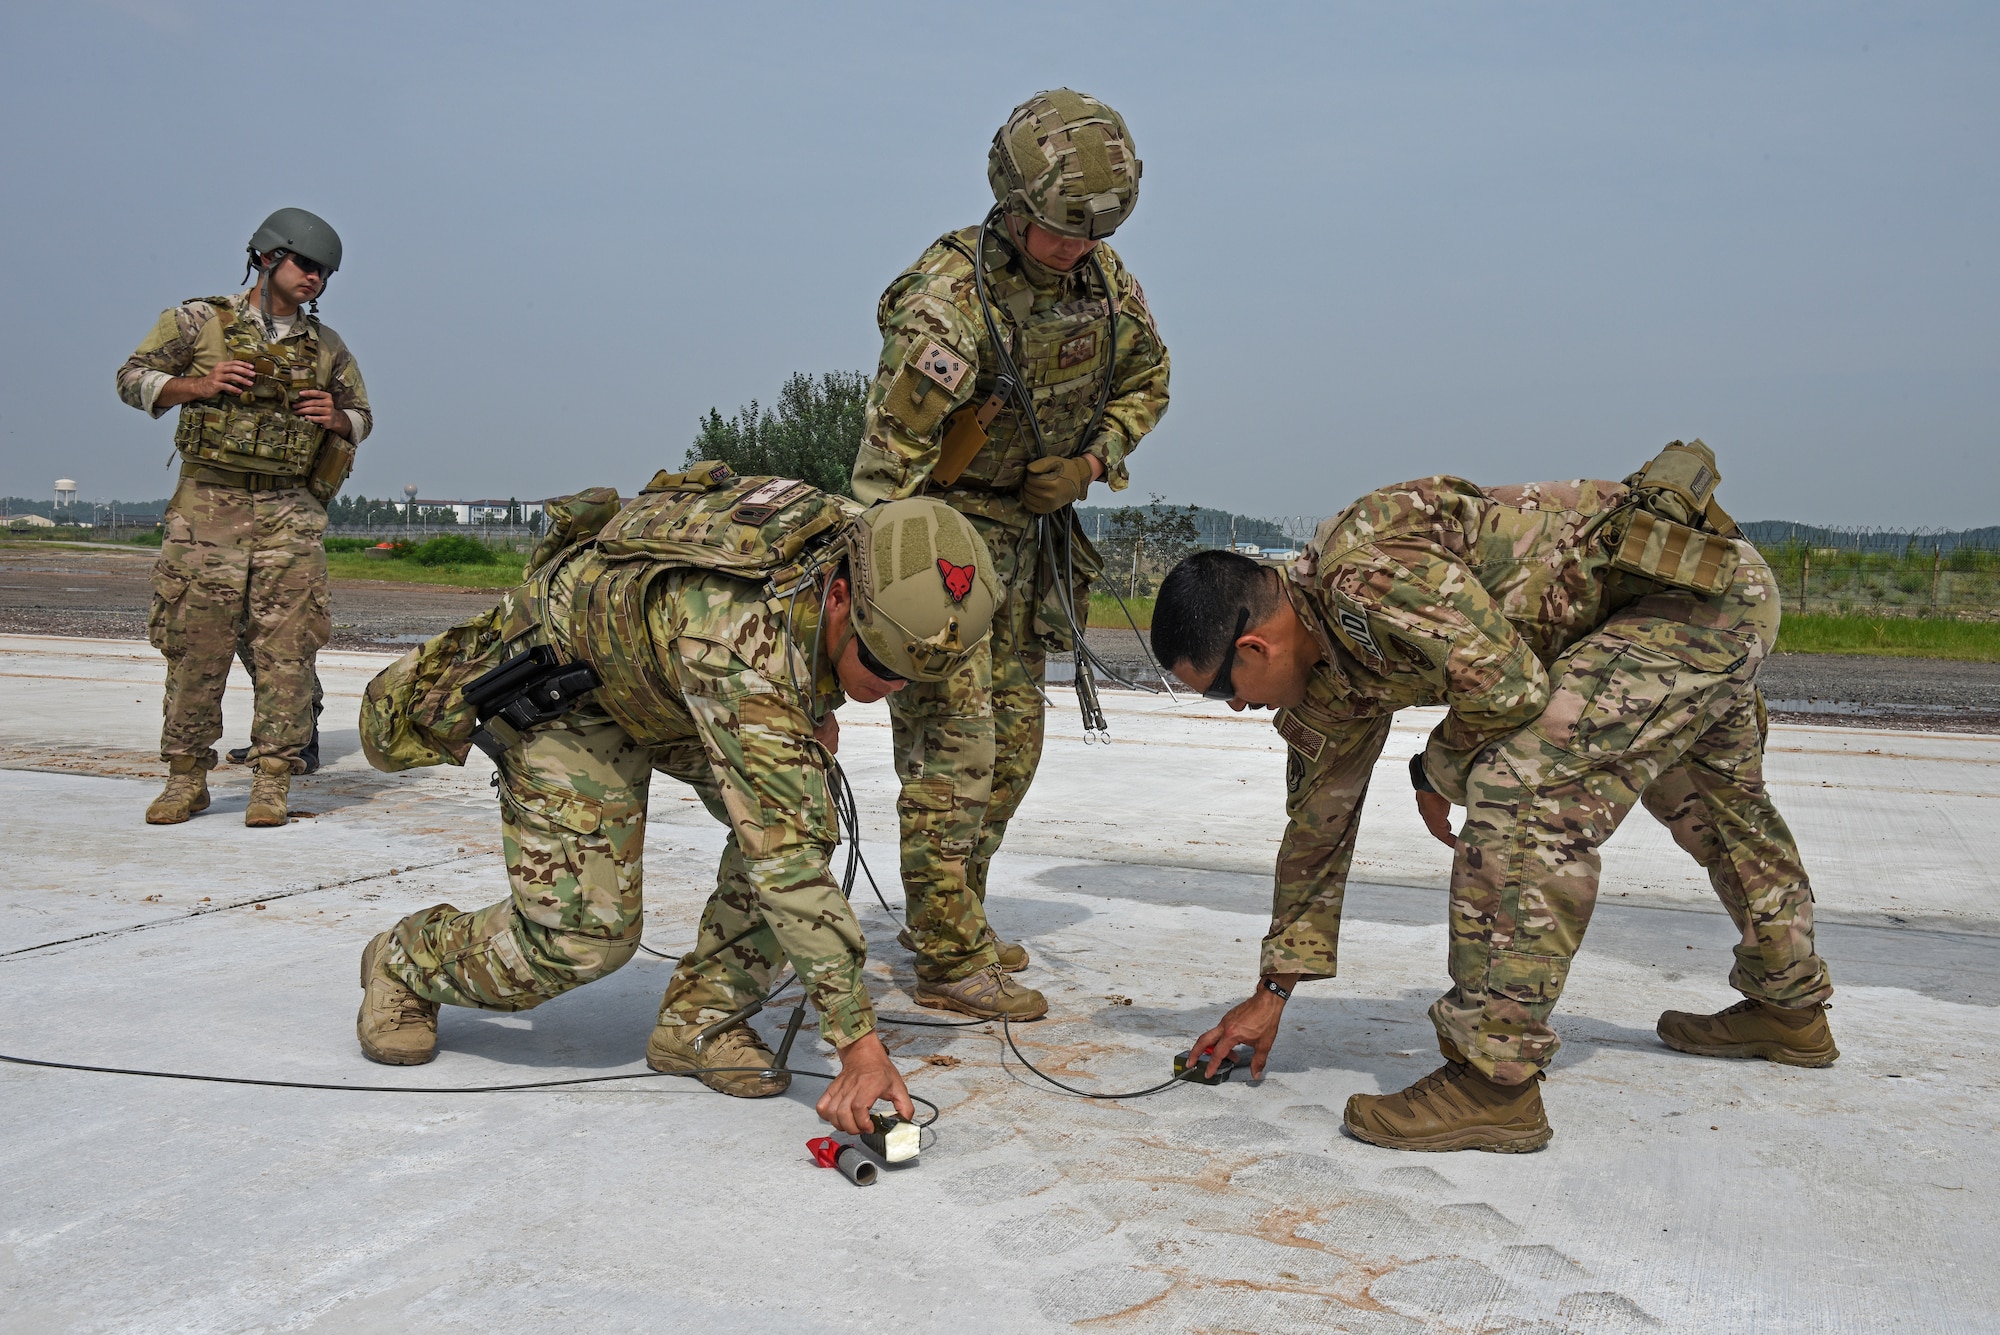 Members of the 8th Civil Engineer Squadron Explosive Ordnance Disposal unit conduct joint ordnance disposal training with the 38th Fighter Group at Kunsan Air Base, Republic of Korea, Aug. 22, 2019. More than 20 Airmen from the two units participated in the joint training, which challenged the EOD units to demonstrate how they would properly dispose of unexploded ordnance in various settings. (U.S. Air Force photo by Staff Sgt. Mackenzie Mendez)